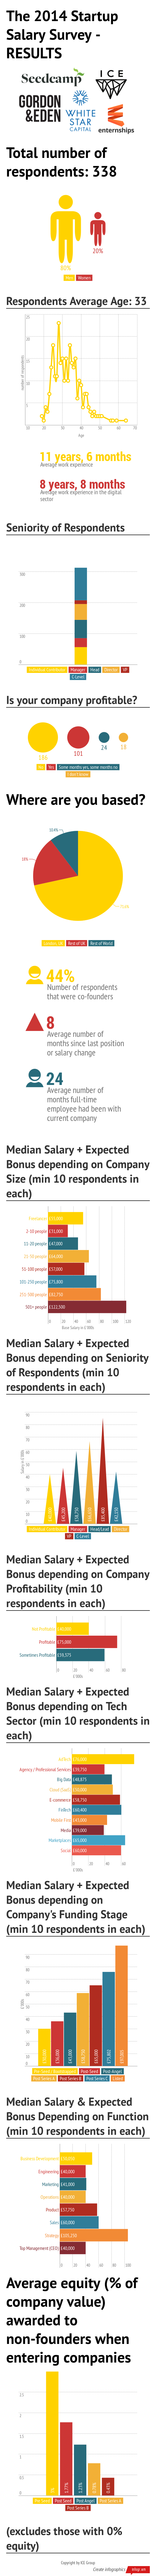 The_2014_Startup_Salary_Survey__RESULTS (1)